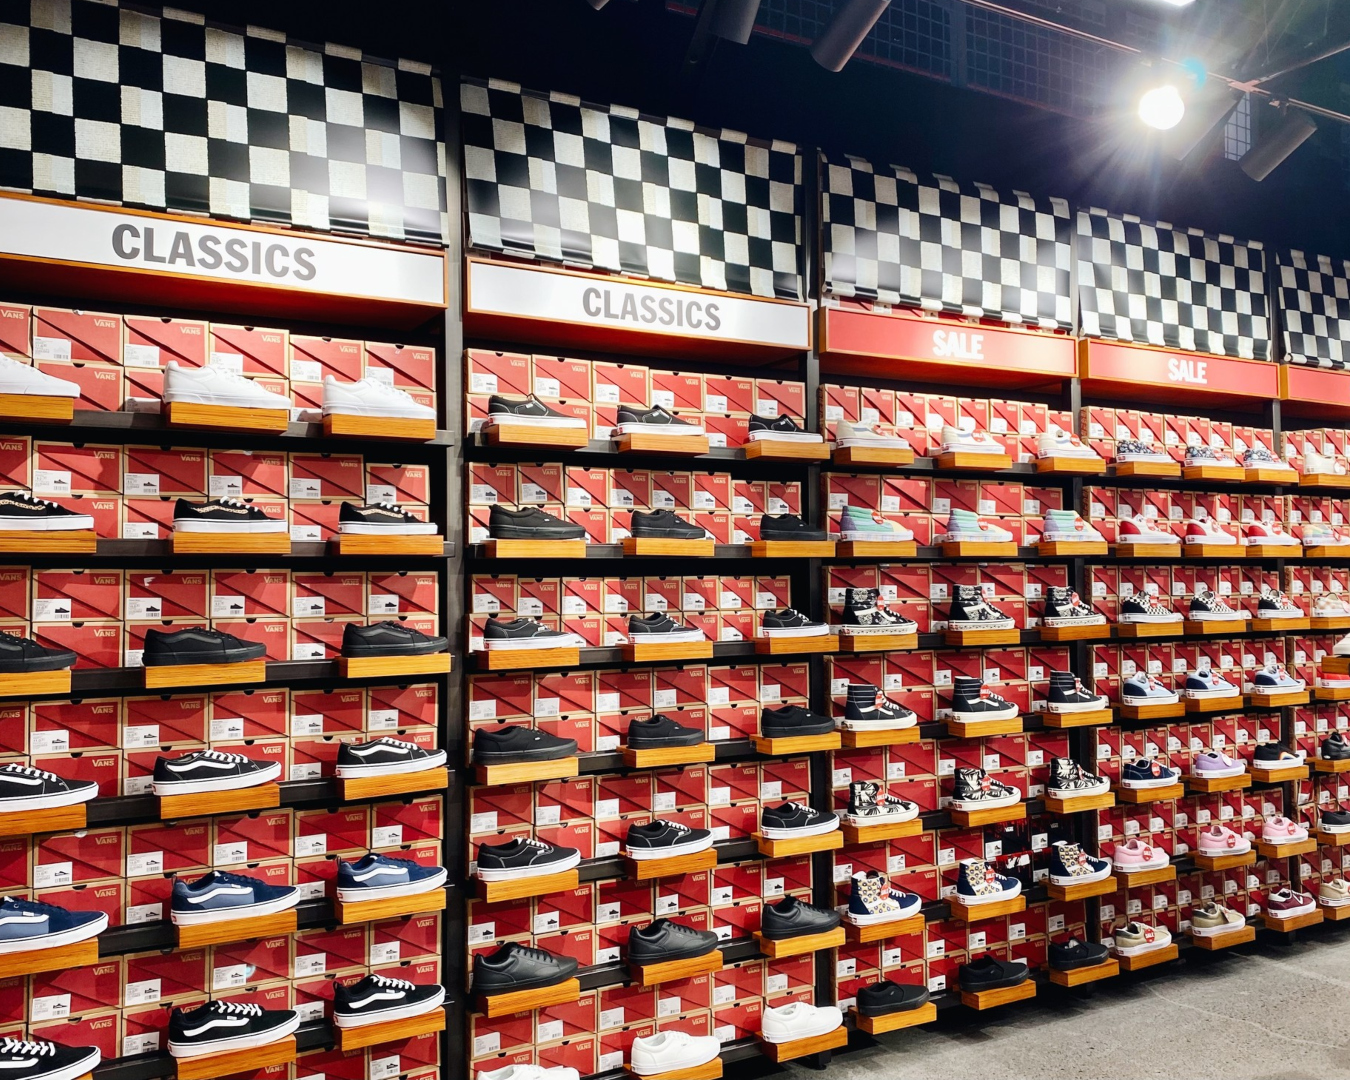 A wall filled from floor to ceiling with Vans skate shoes. 